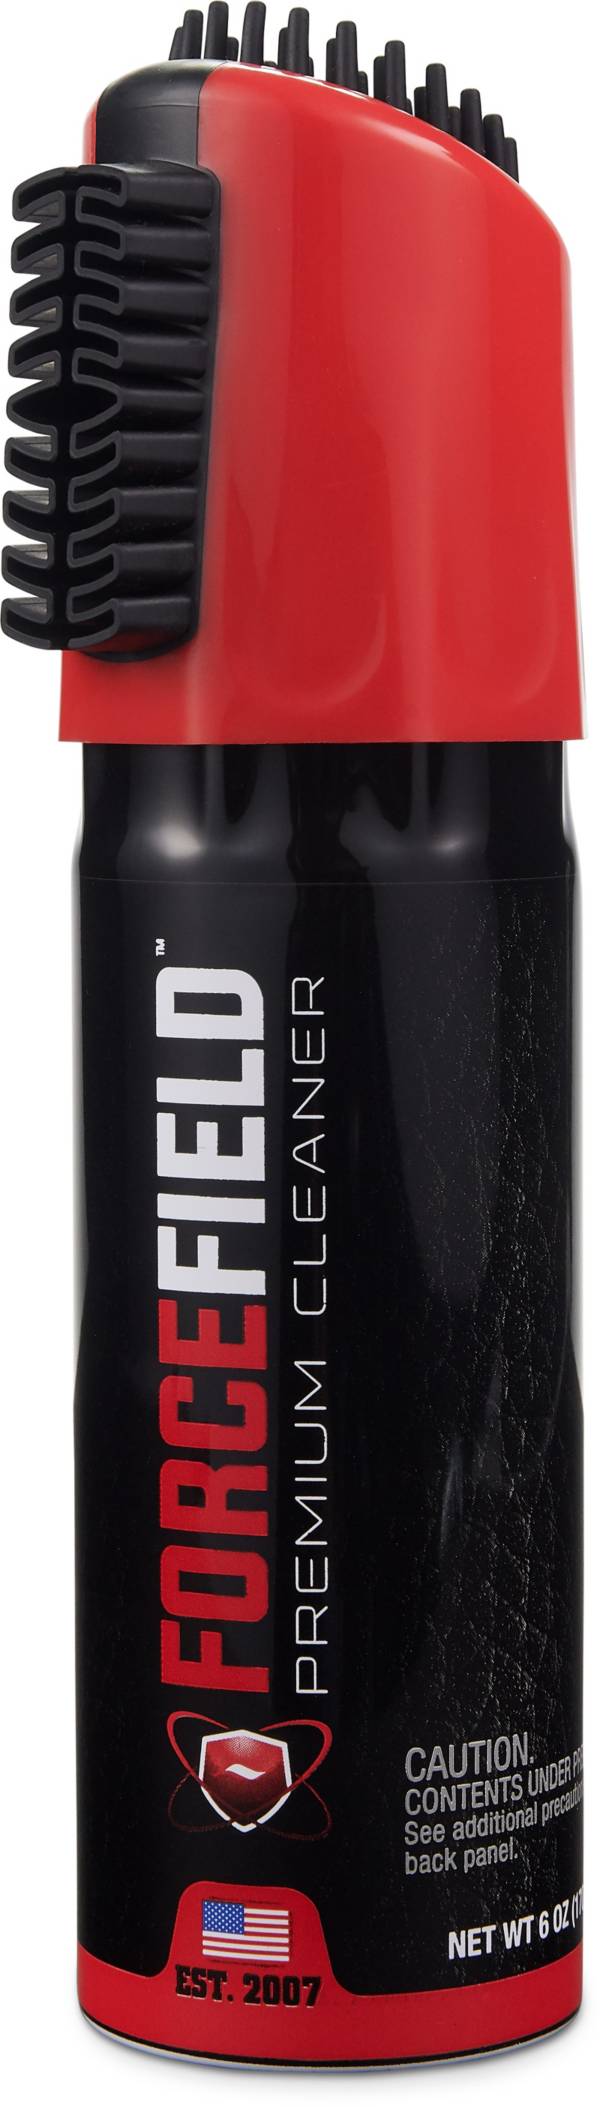 ForceField Premium Shoe Cleaner with Scrub product image